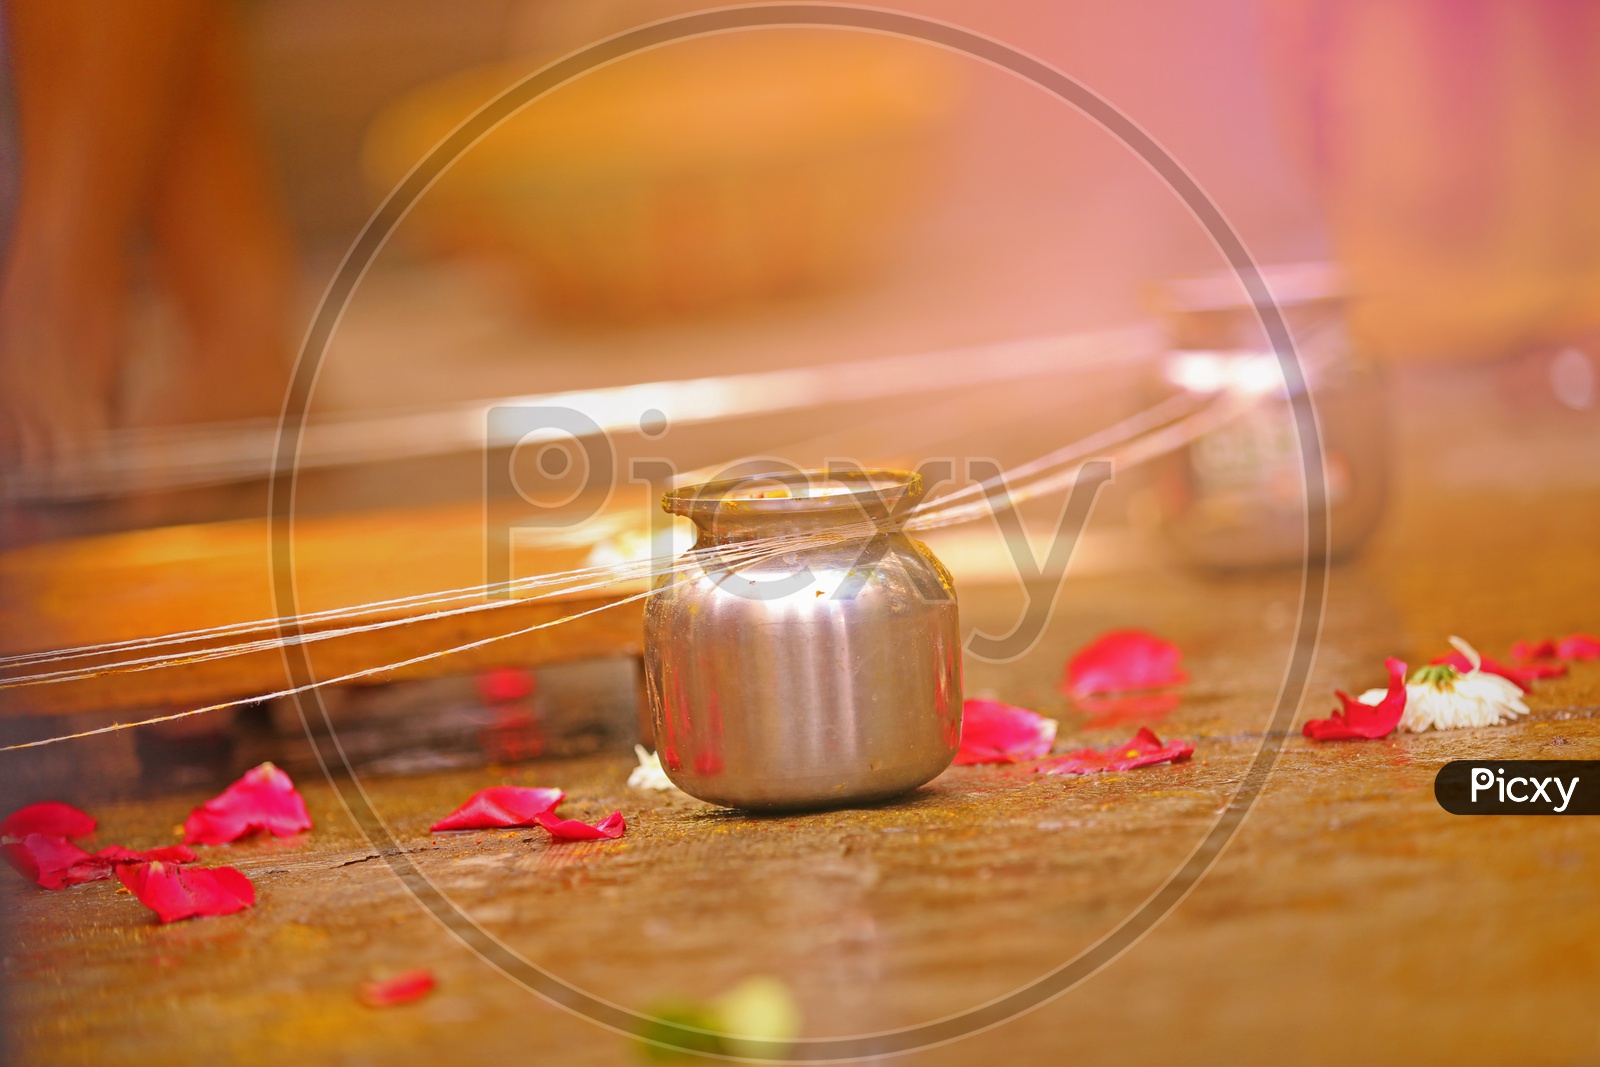 A Hindu Wedding Coustom Ritual Shots / A tumbler With Thread Tied and rose Petals Lying on Floor